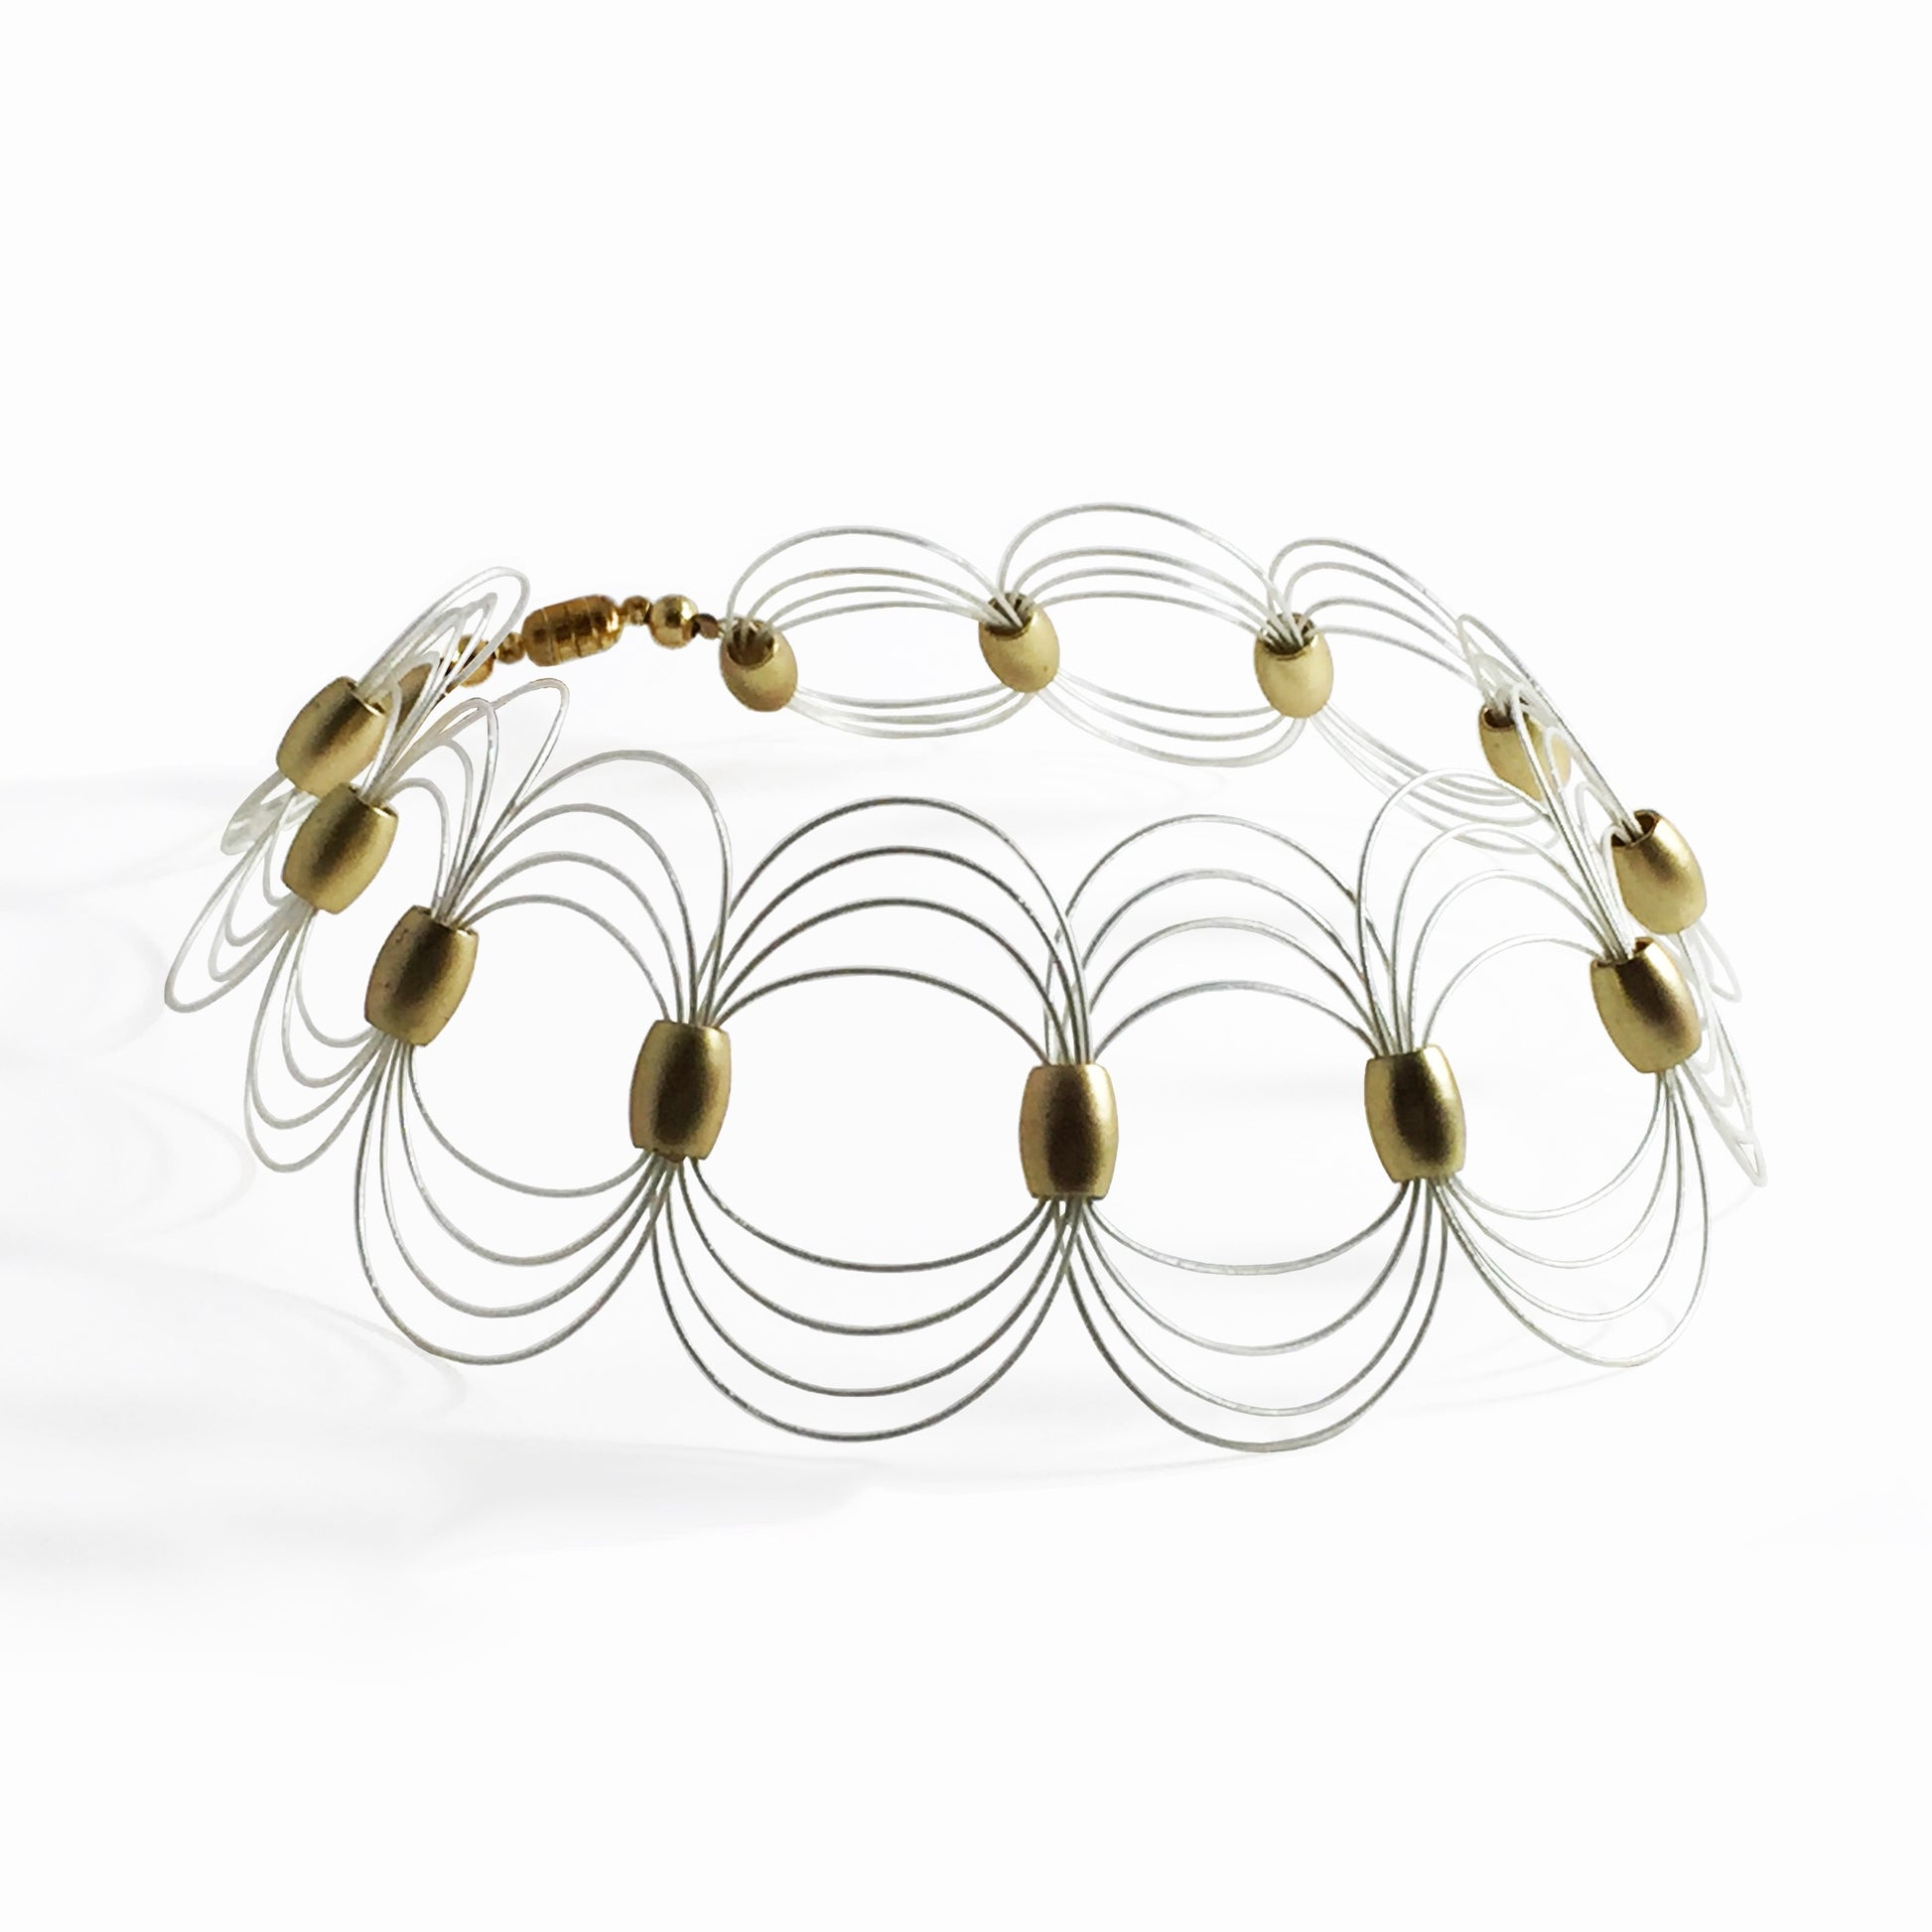 ONDA Choker Necklace  Wire 925 Sterlling Silver  Gold color acrylic Beads.  Magnetic Clasp.  Gold Filled pieces.